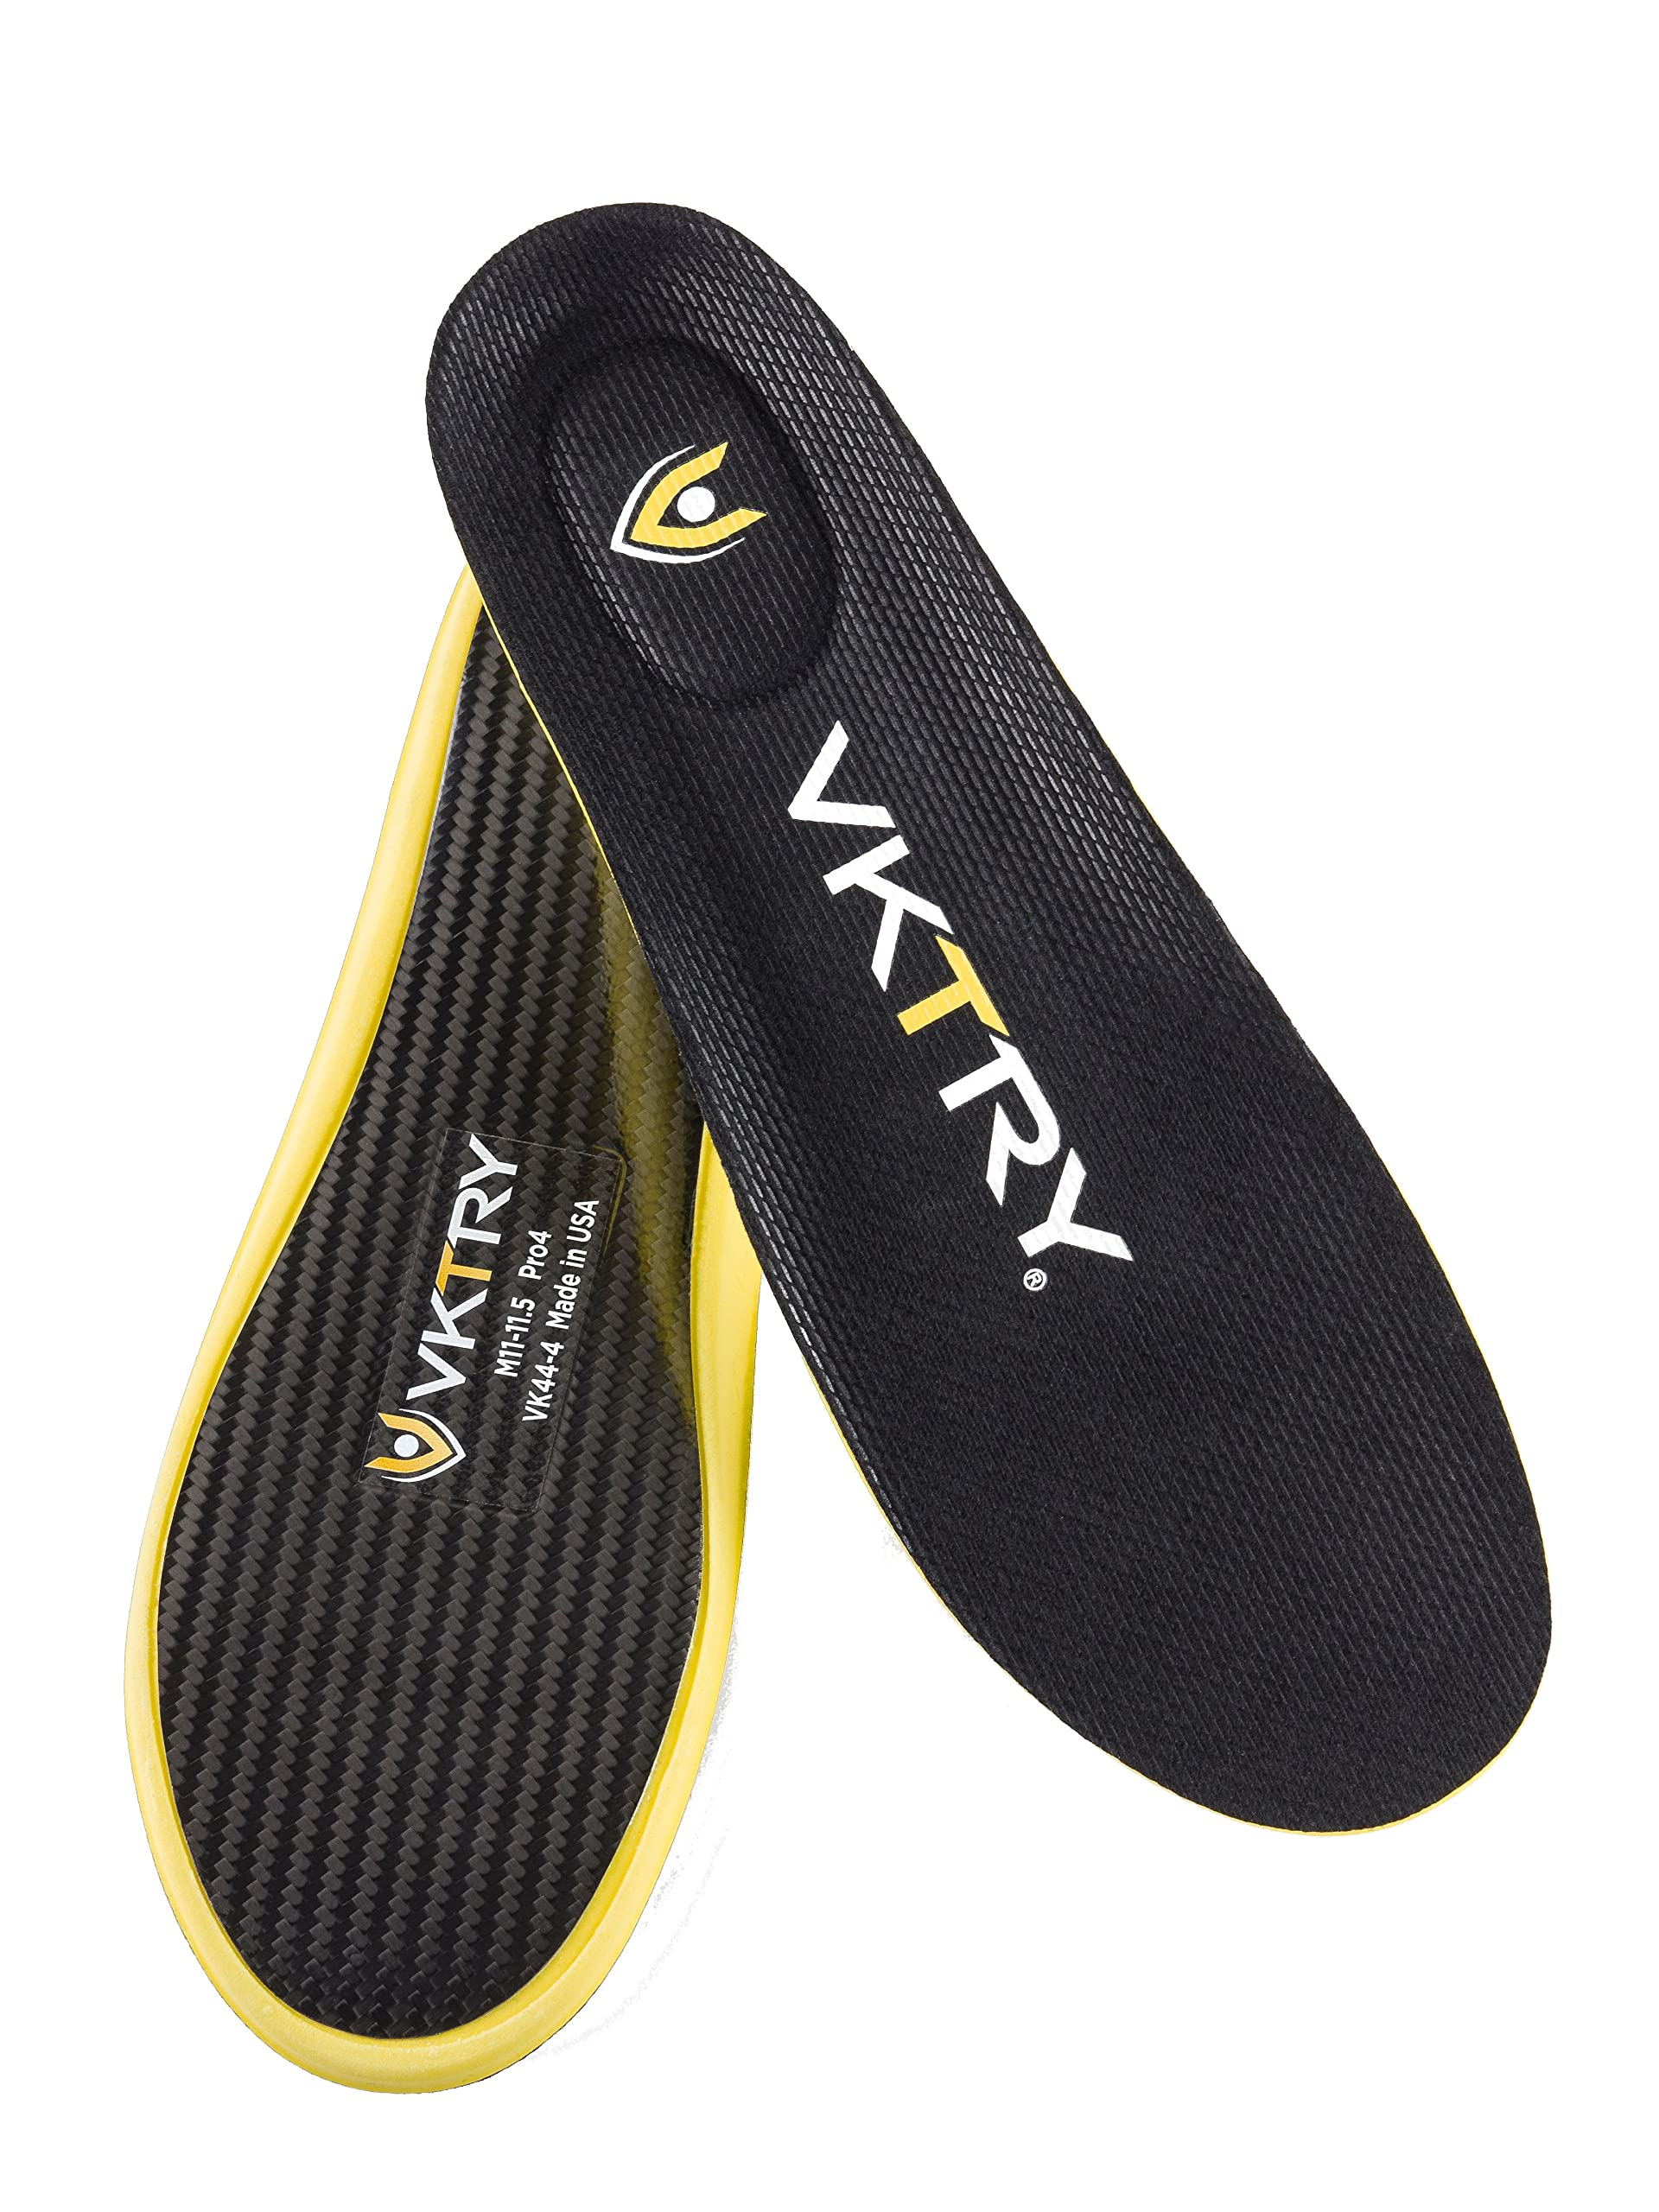 Mua VKTRY Performance Insoles: Carbon Fiber Sports Insoles for Athletes ...